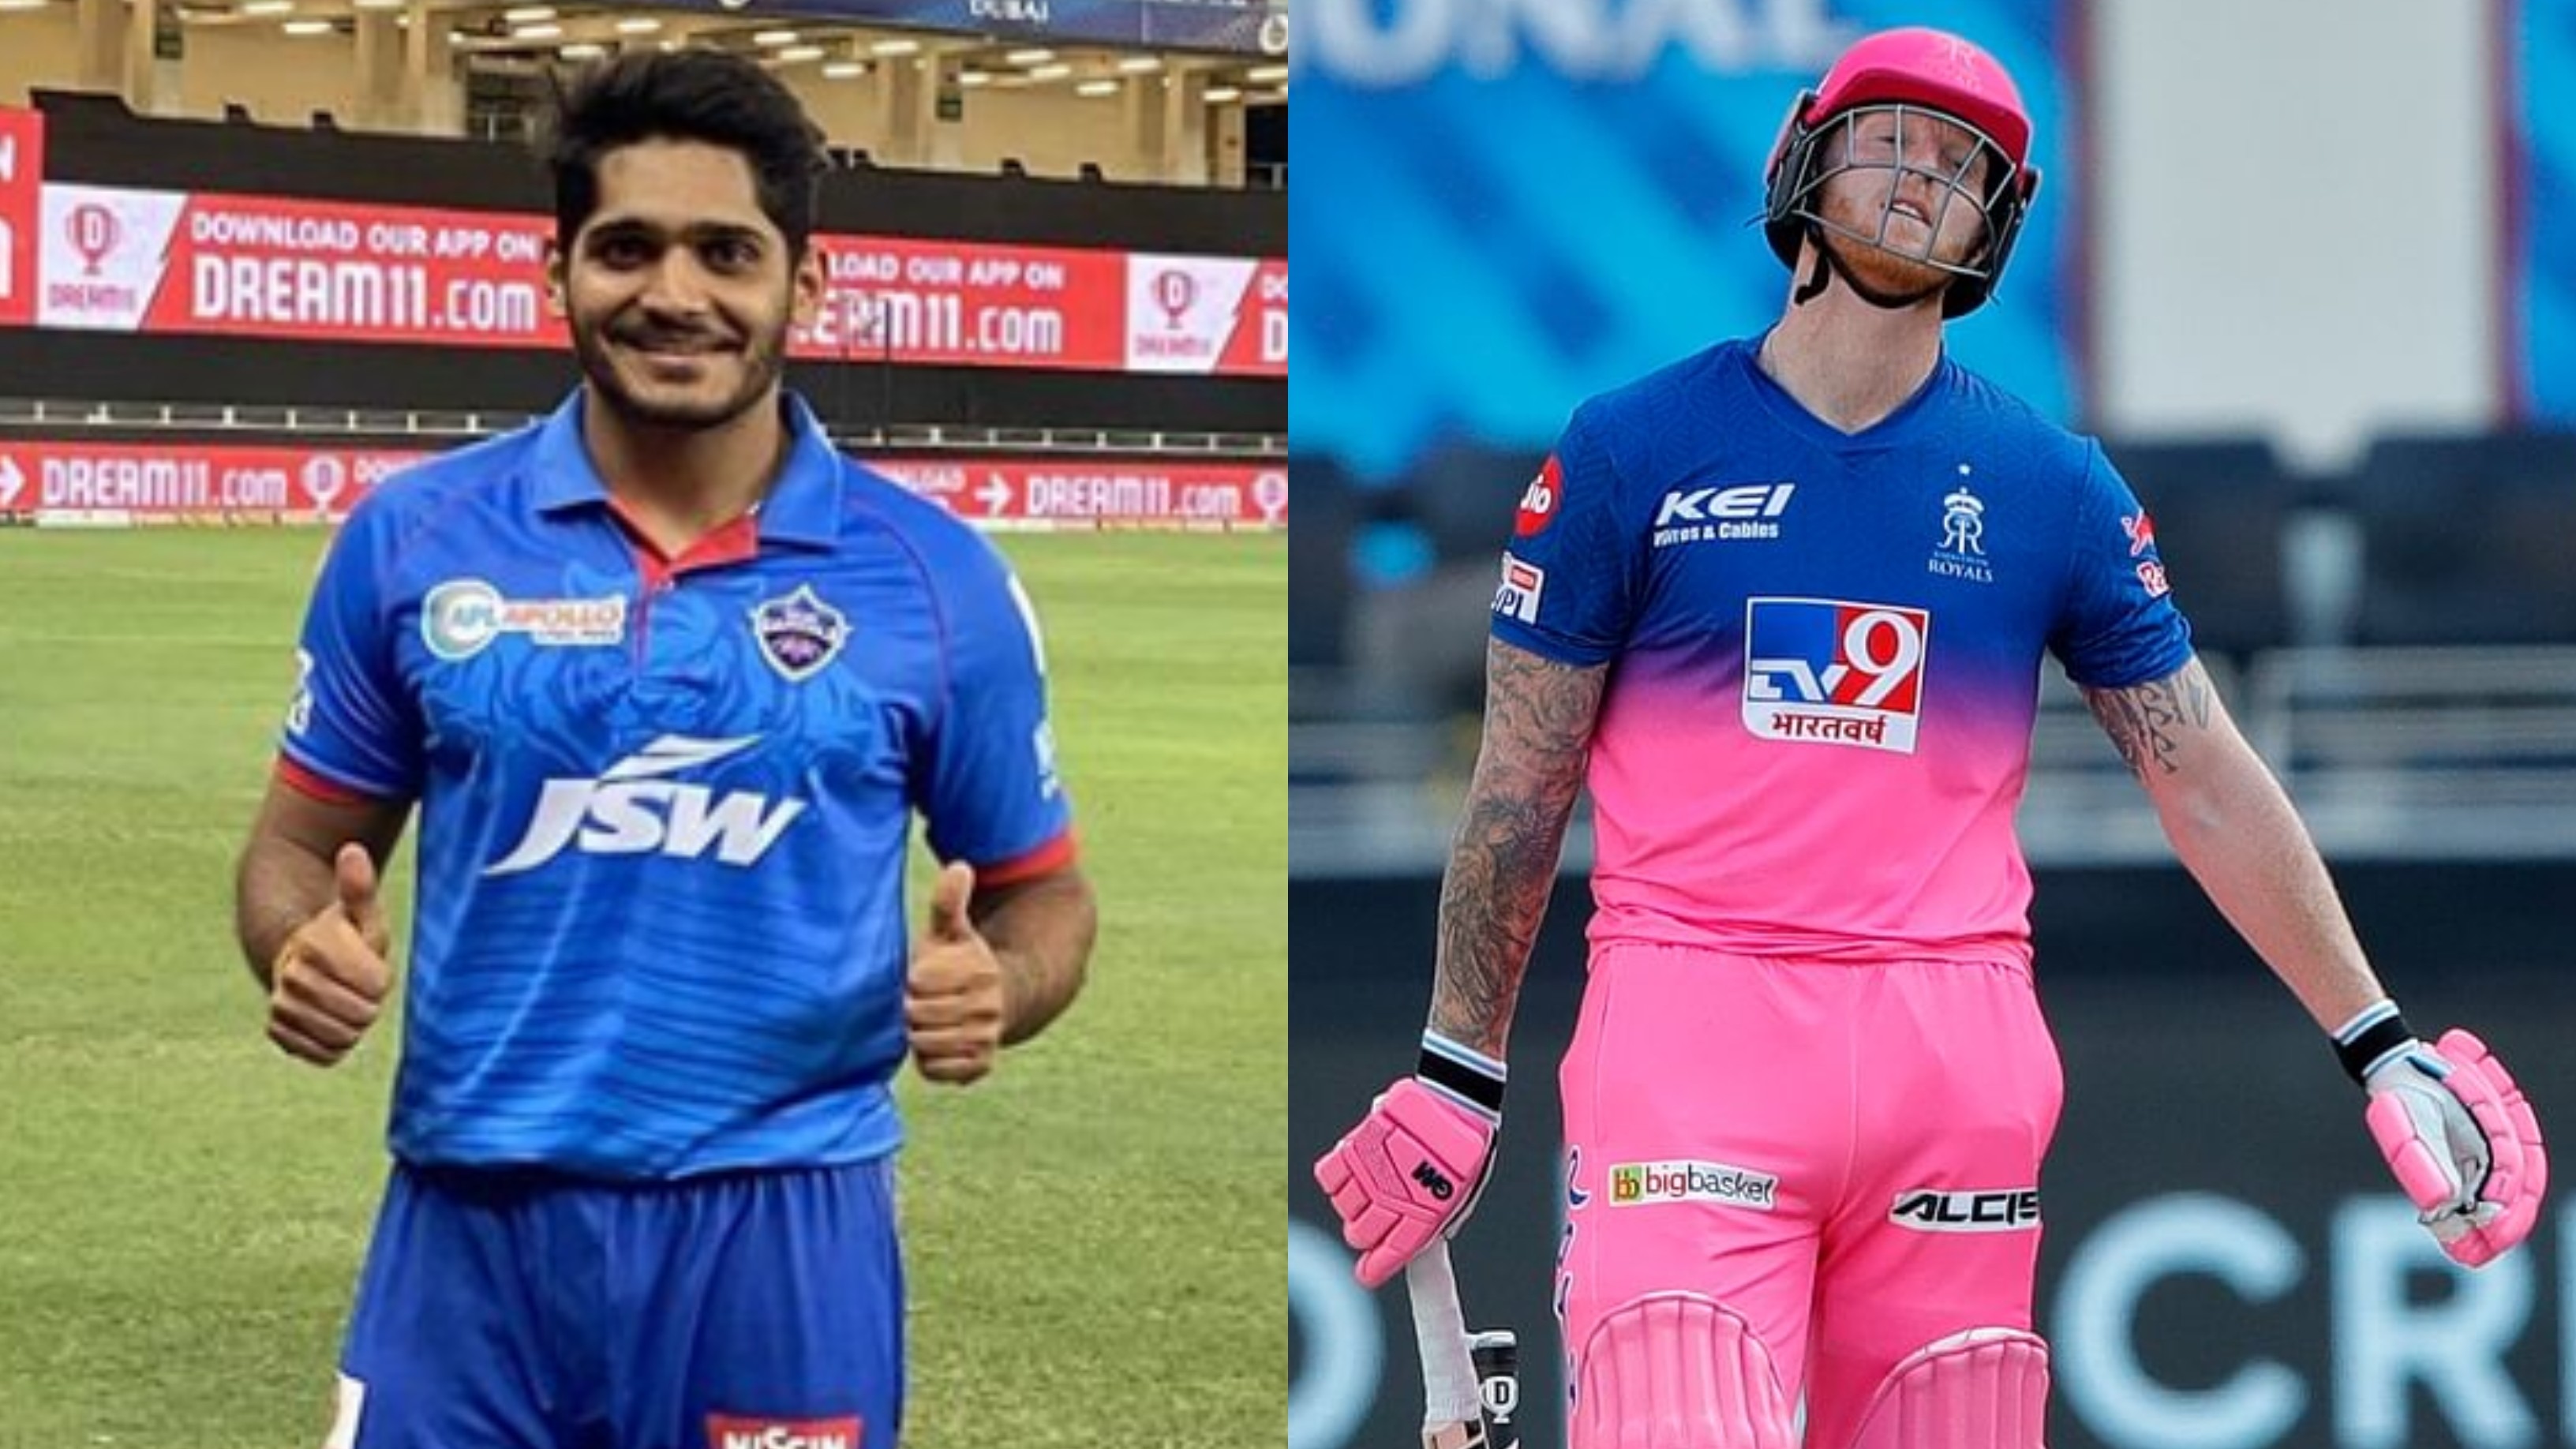 IPL 2020: Ben Stokes as maiden IPL wicket was special, says DC pacer Tushar Deshpande